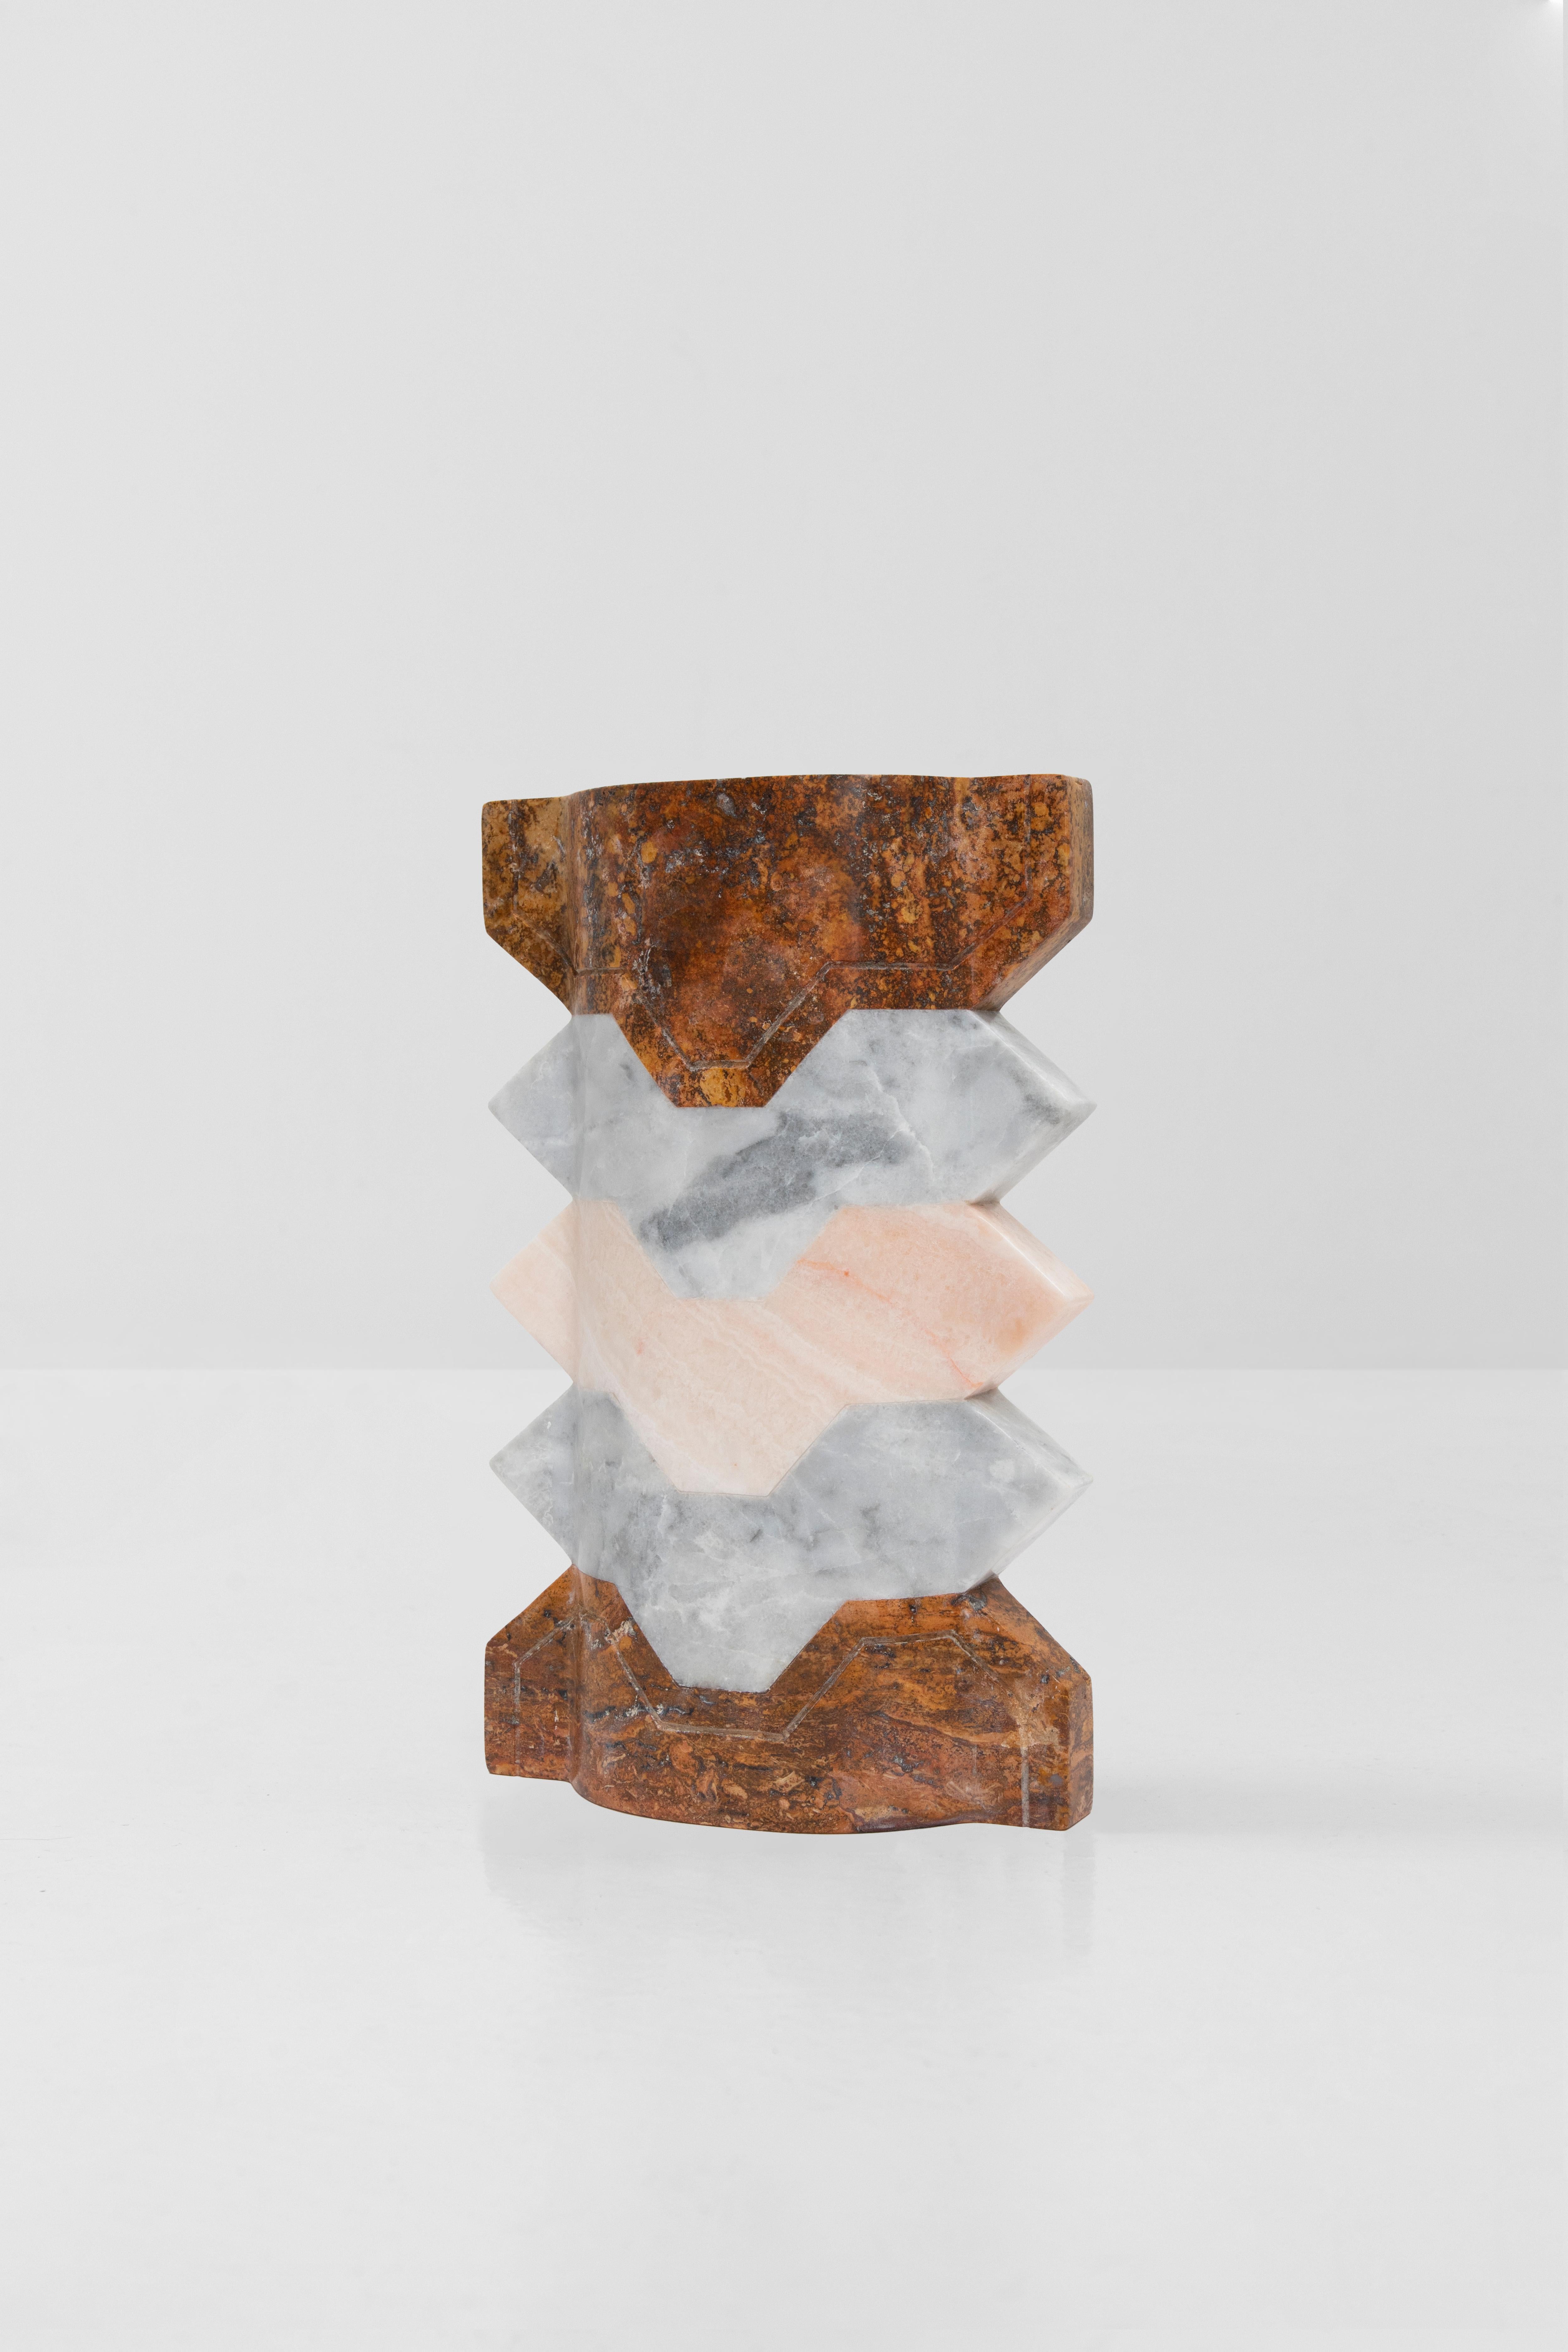 Pink onyx, red travertine and white Venetian marble.
Edition of 10 + 2 AP

**As this work is made of natural stone, color and veins may vary from the photo**
Handcrafted in Mexico

The inspiration for these pieces draws deeply from the ancient and